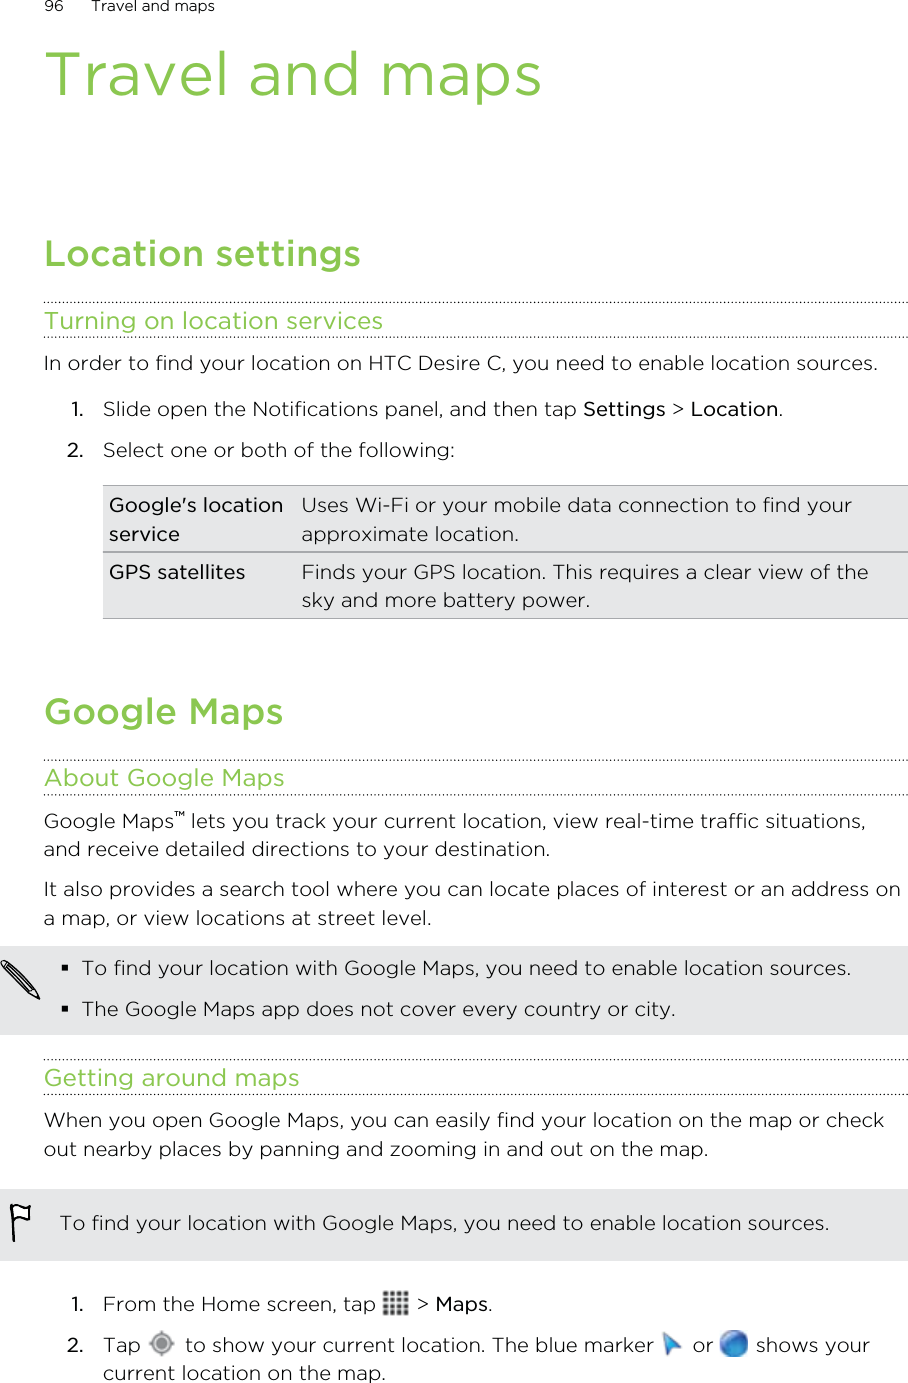 Travel and mapsLocation settingsTurning on location servicesIn order to find your location on HTC Desire C, you need to enable location sources.1. Slide open the Notifications panel, and then tap Settings &gt; Location.2. Select one or both of the following:Google&apos;s locationserviceUses Wi-Fi or your mobile data connection to find yourapproximate location.GPS satellites Finds your GPS location. This requires a clear view of thesky and more battery power.Google MapsAbout Google MapsGoogle Maps™ lets you track your current location, view real-time traffic situations,and receive detailed directions to your destination.It also provides a search tool where you can locate places of interest or an address ona map, or view locations at street level.To find your location with Google Maps, you need to enable location sources.The Google Maps app does not cover every country or city.Getting around mapsWhen you open Google Maps, you can easily find your location on the map or checkout nearby places by panning and zooming in and out on the map.To find your location with Google Maps, you need to enable location sources.1. From the Home screen, tap   &gt; Maps.2. Tap   to show your current location. The blue marker   or   shows yourcurrent location on the map.96 Travel and maps